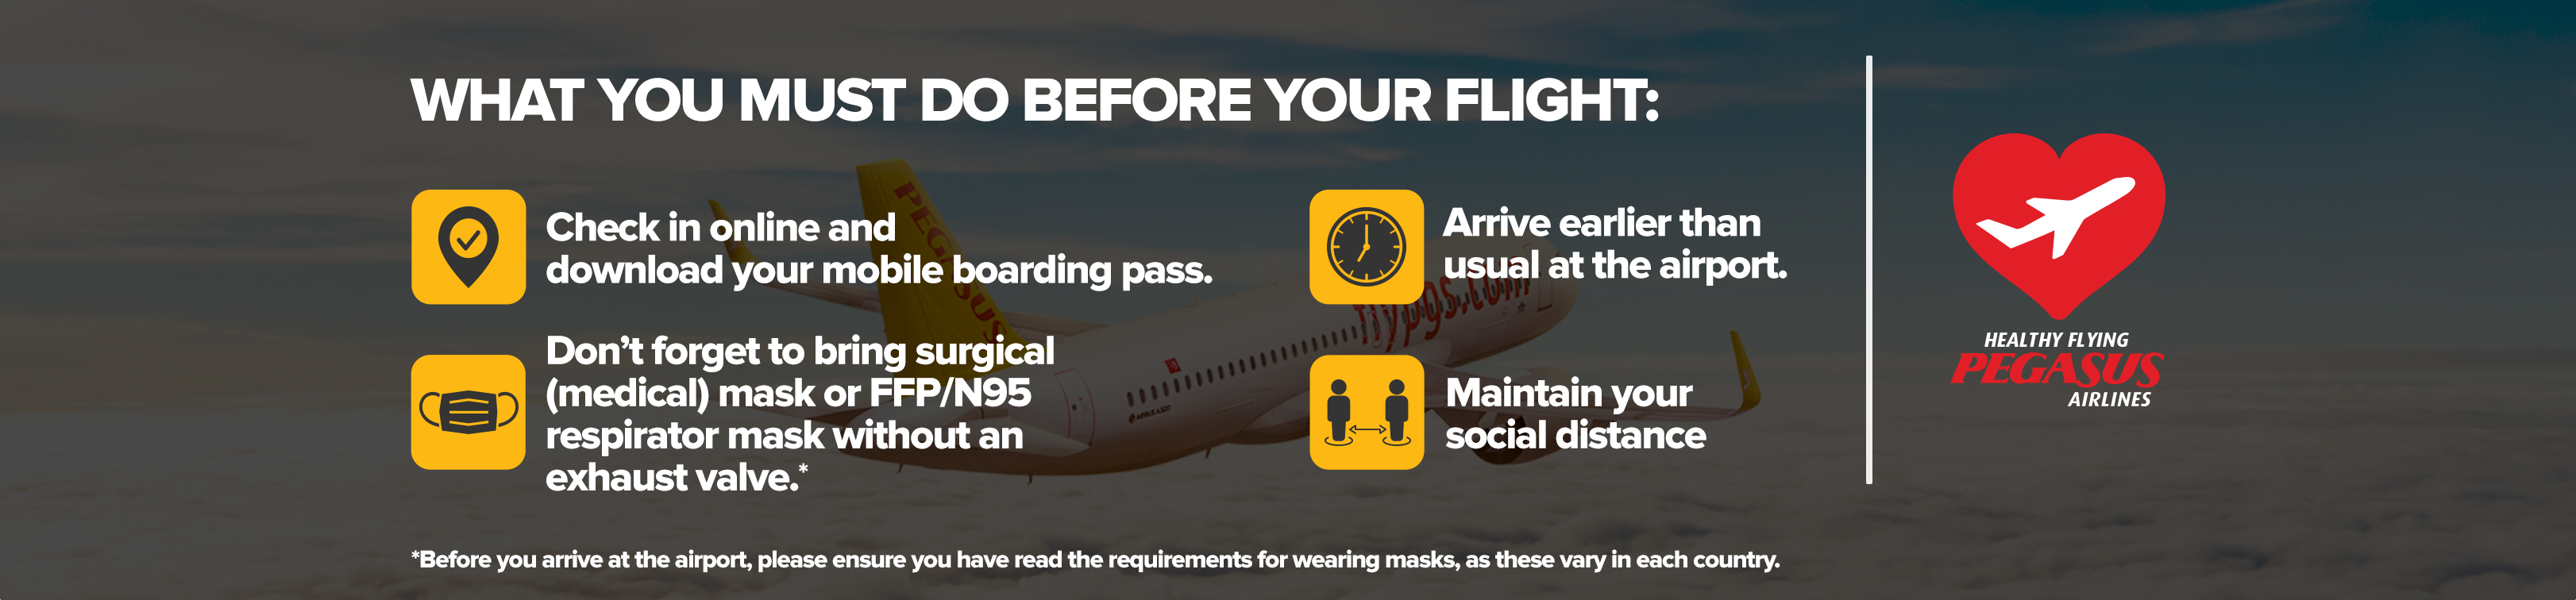 what you must do before your flight